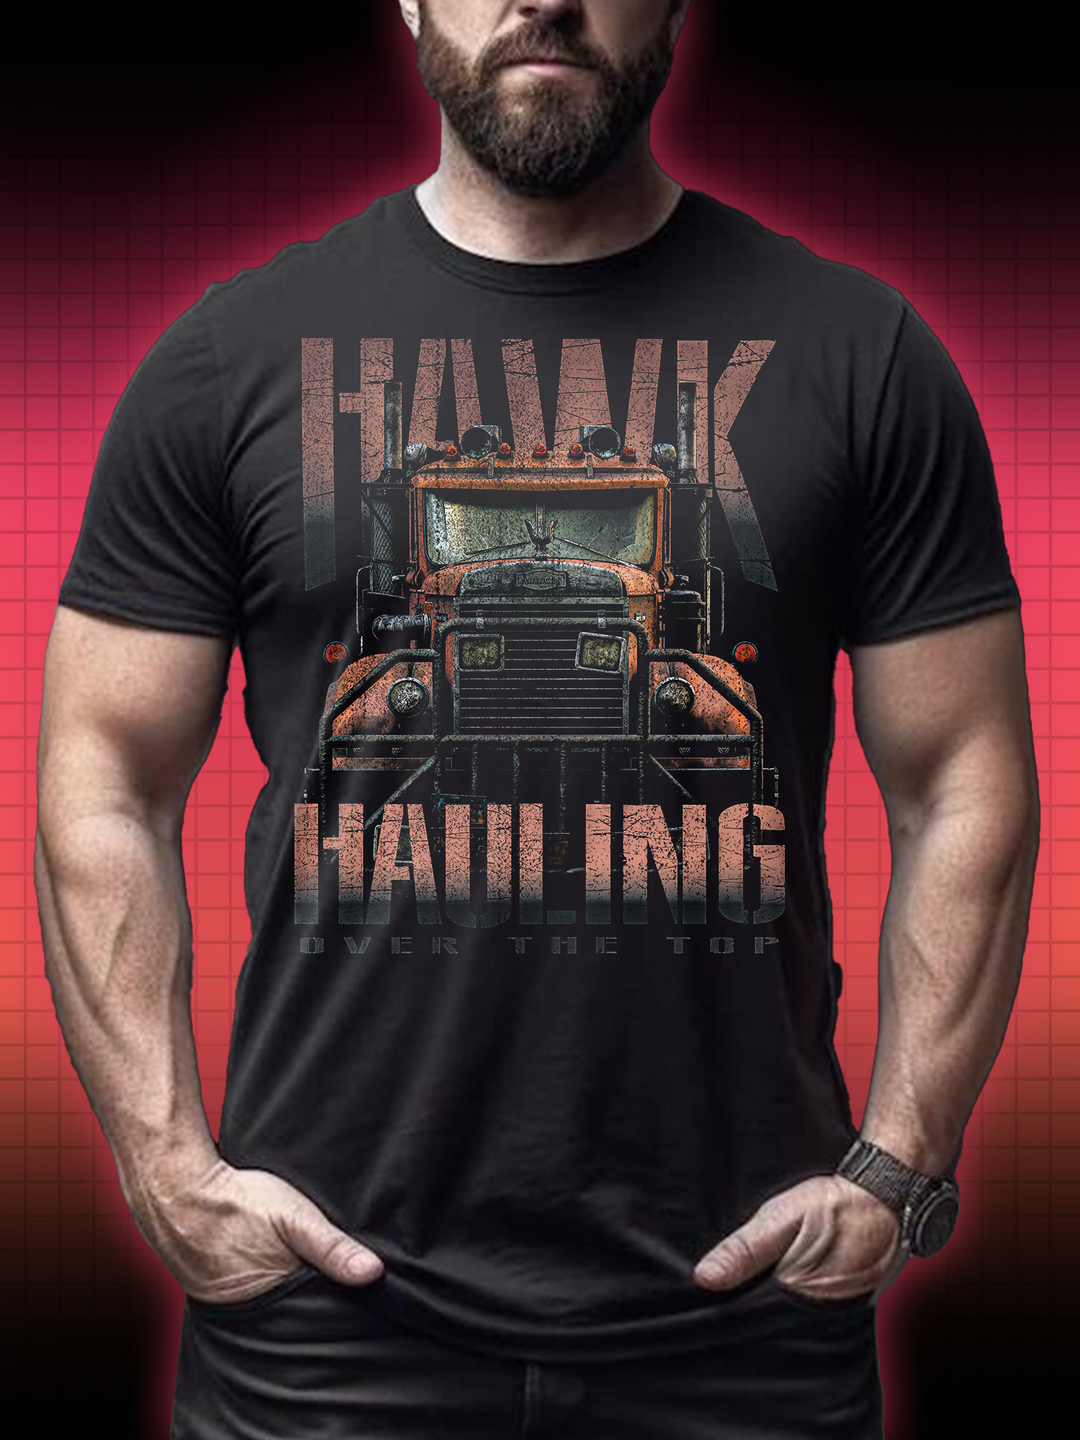 LINCOLNS TRUCK HAWK HAULING | OVER THE TOP STALLONE | T-SHIRT - DRAMAMONKS